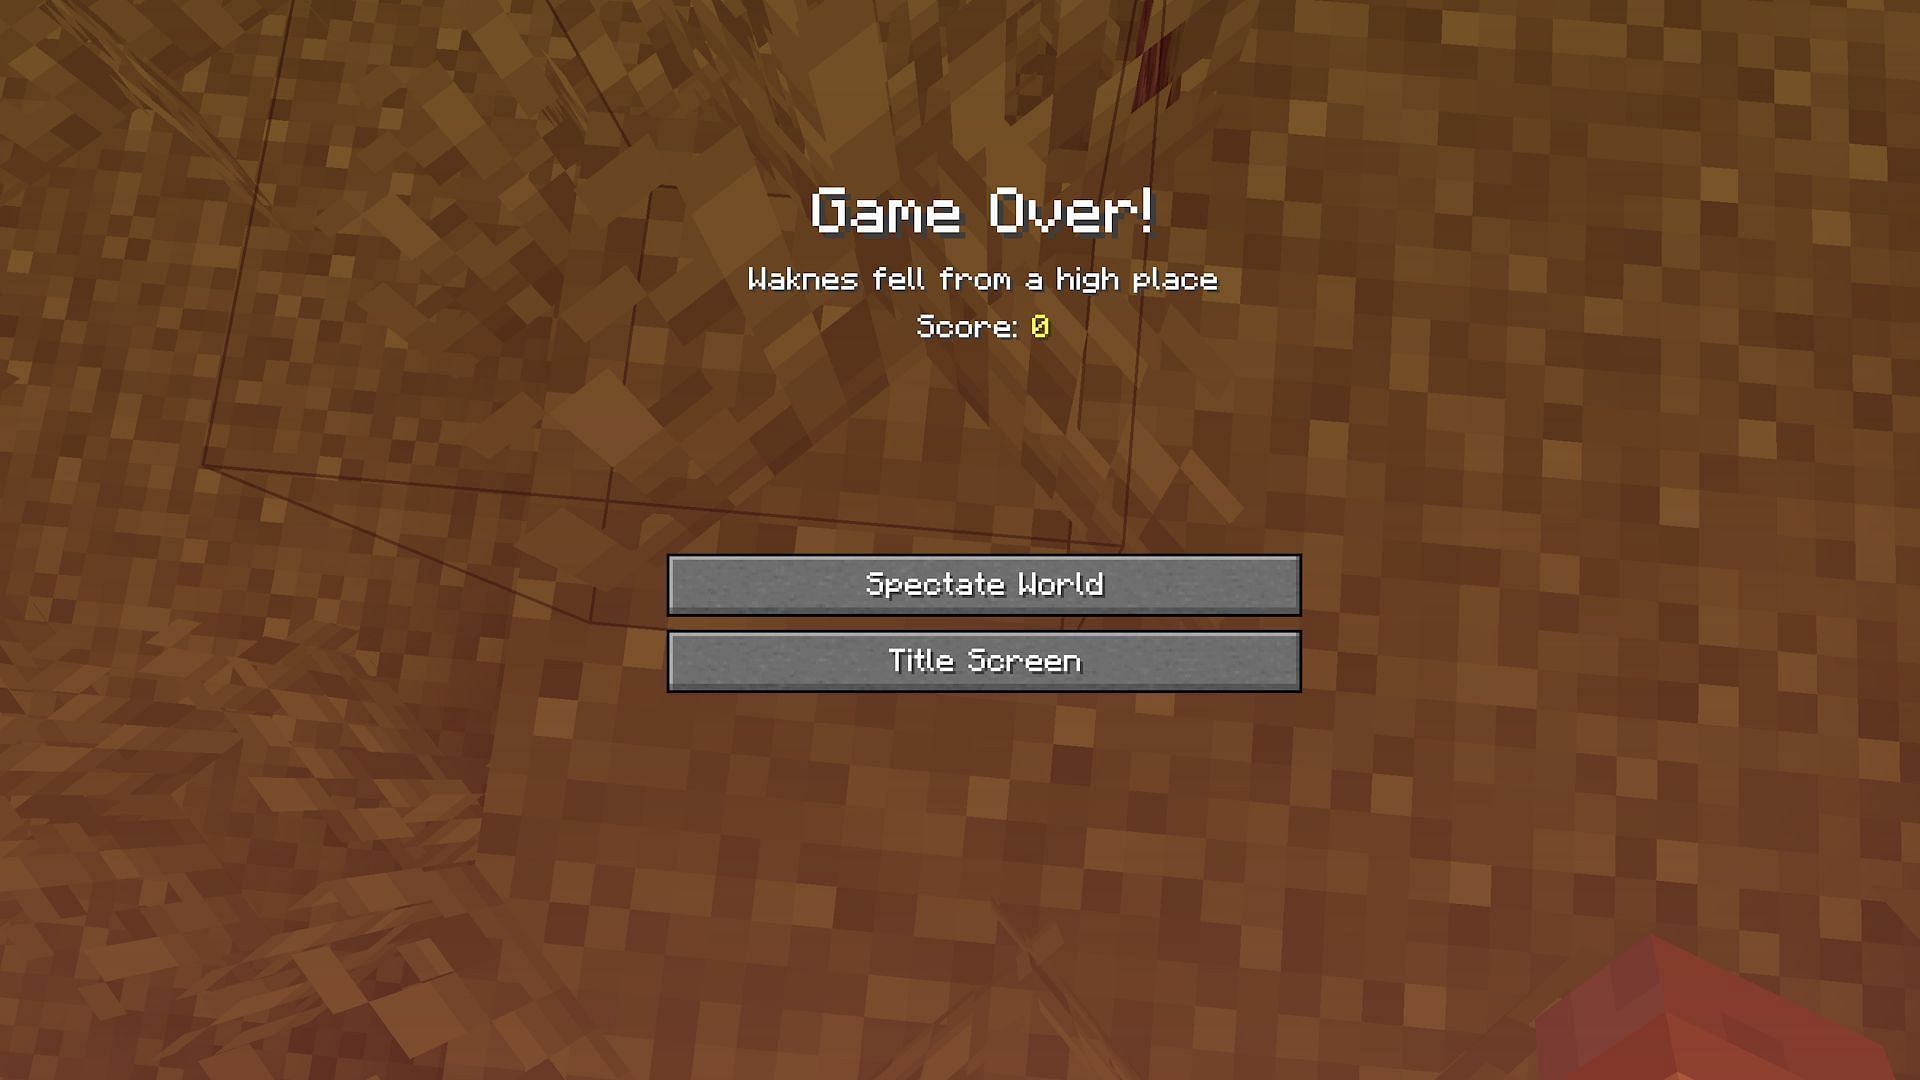 Hardcore worlds should now properly read &quot;Spectate World&quot; on the death screen (Image via Mojang)